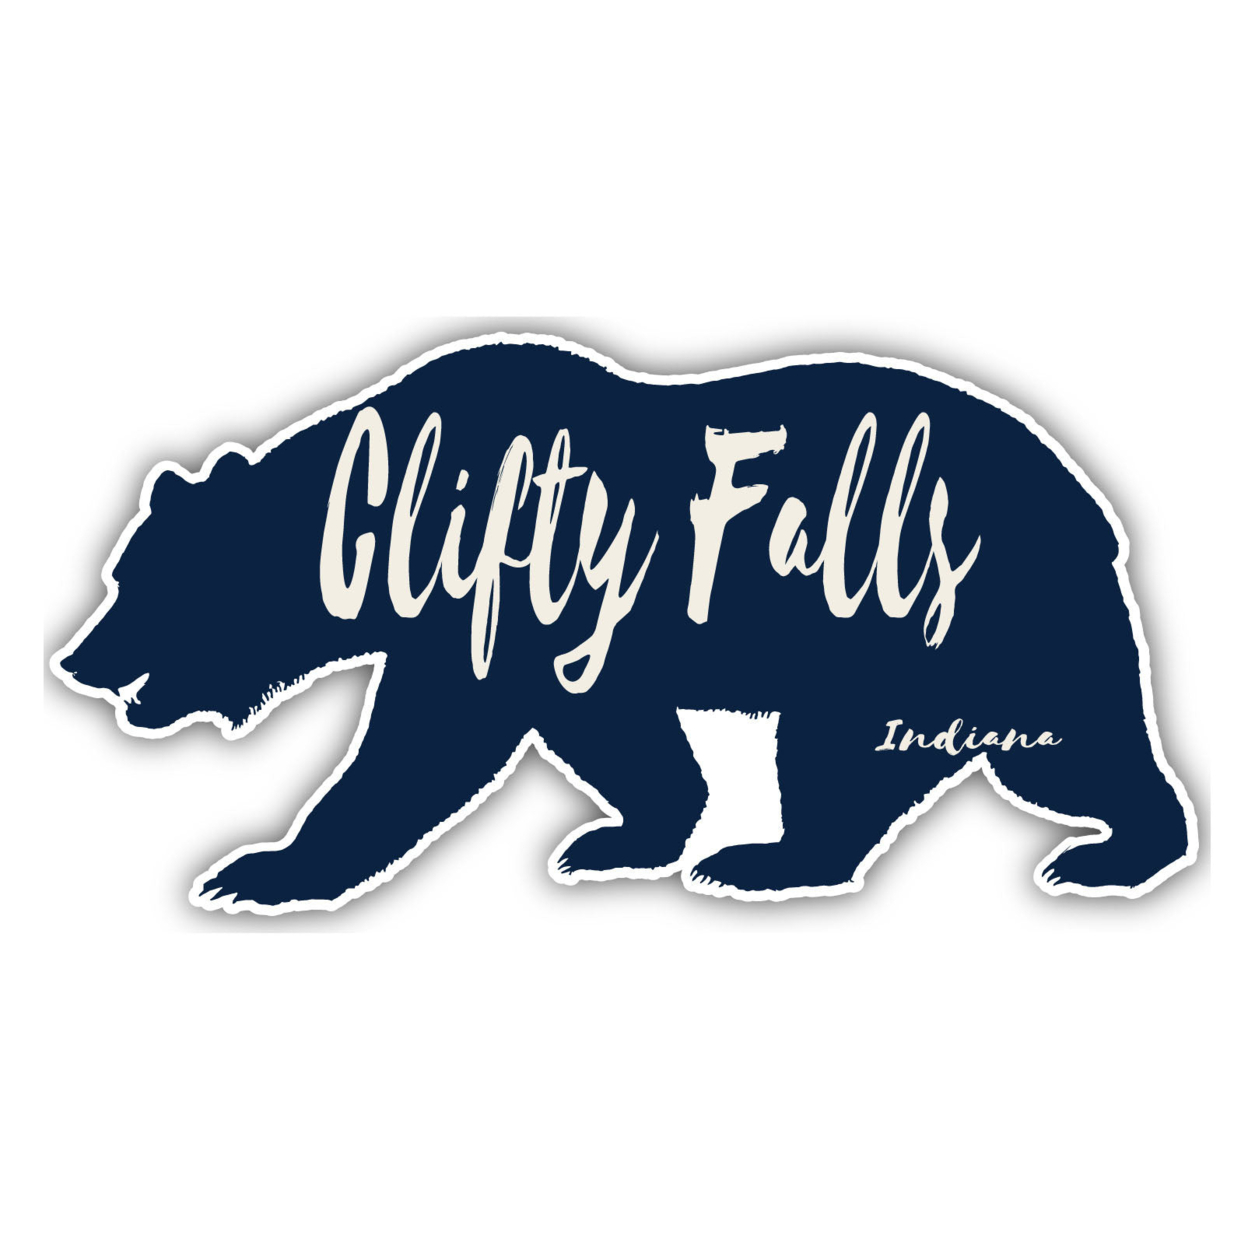 Clifty Falls Indiana Souvenir Decorative Stickers (Choose Theme And Size) - 4-Pack, 8-Inch, Bear